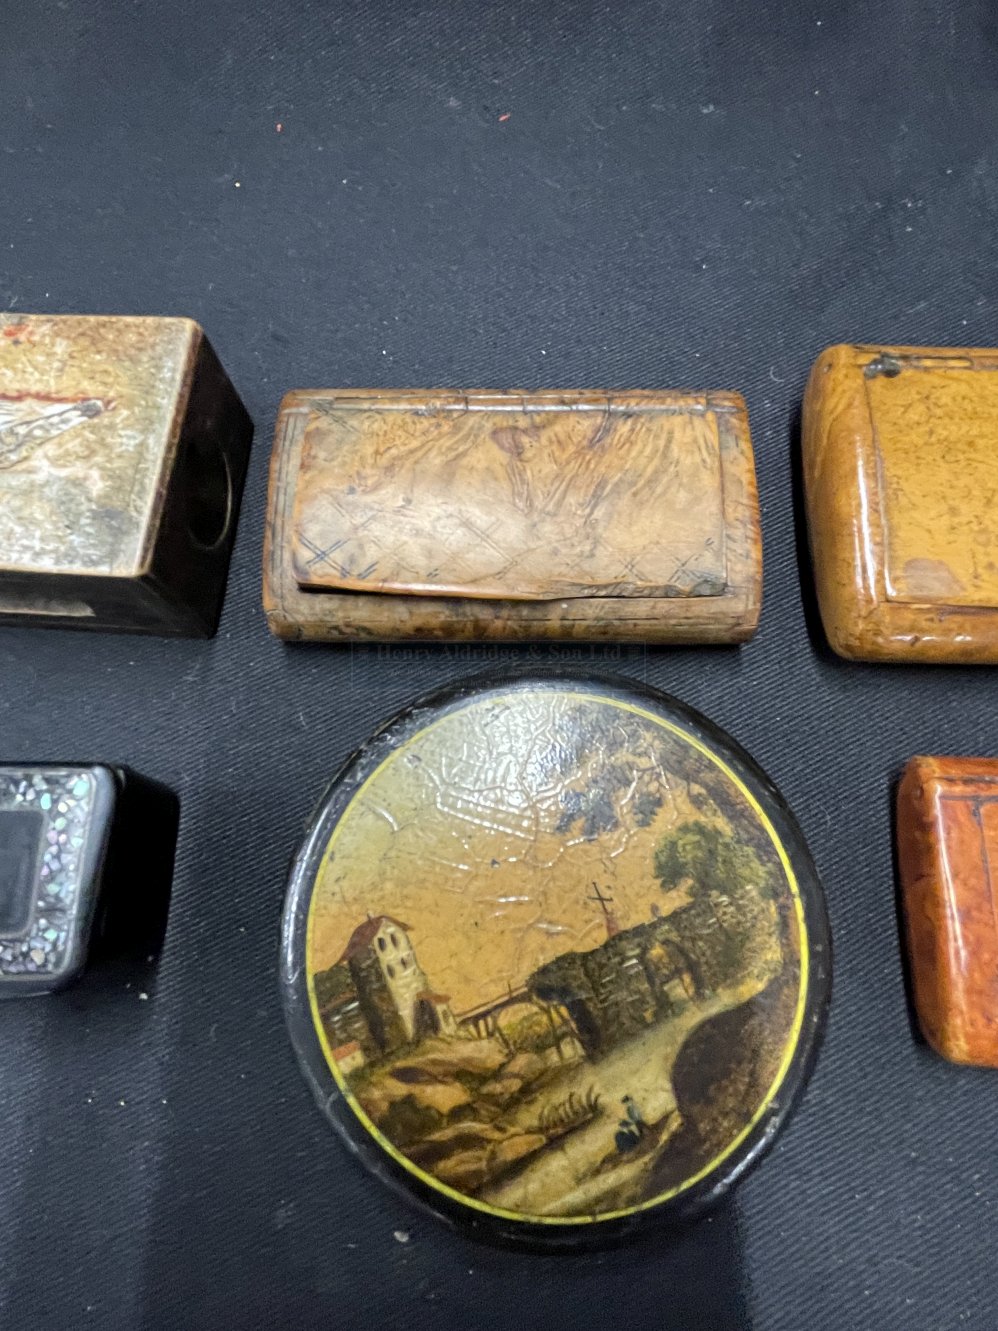 19th cent. Snuff boxes, three treen and two papier mache boxes. (5) Plus matchbox cover. - Image 3 of 4